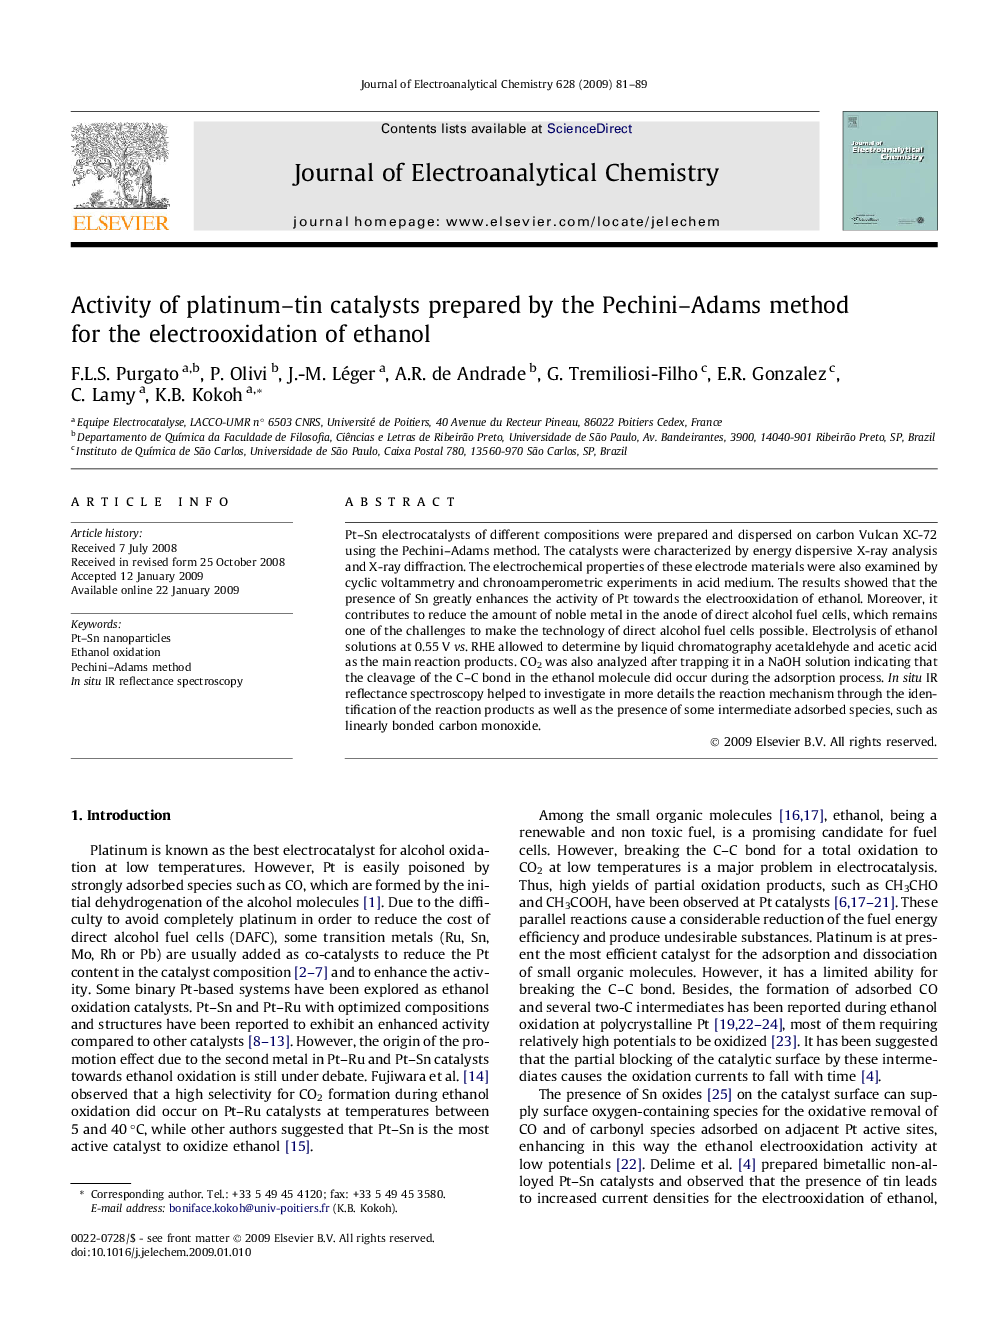 Activity of platinum–tin catalysts prepared by the Pechini–Adams method for the electrooxidation of ethanol